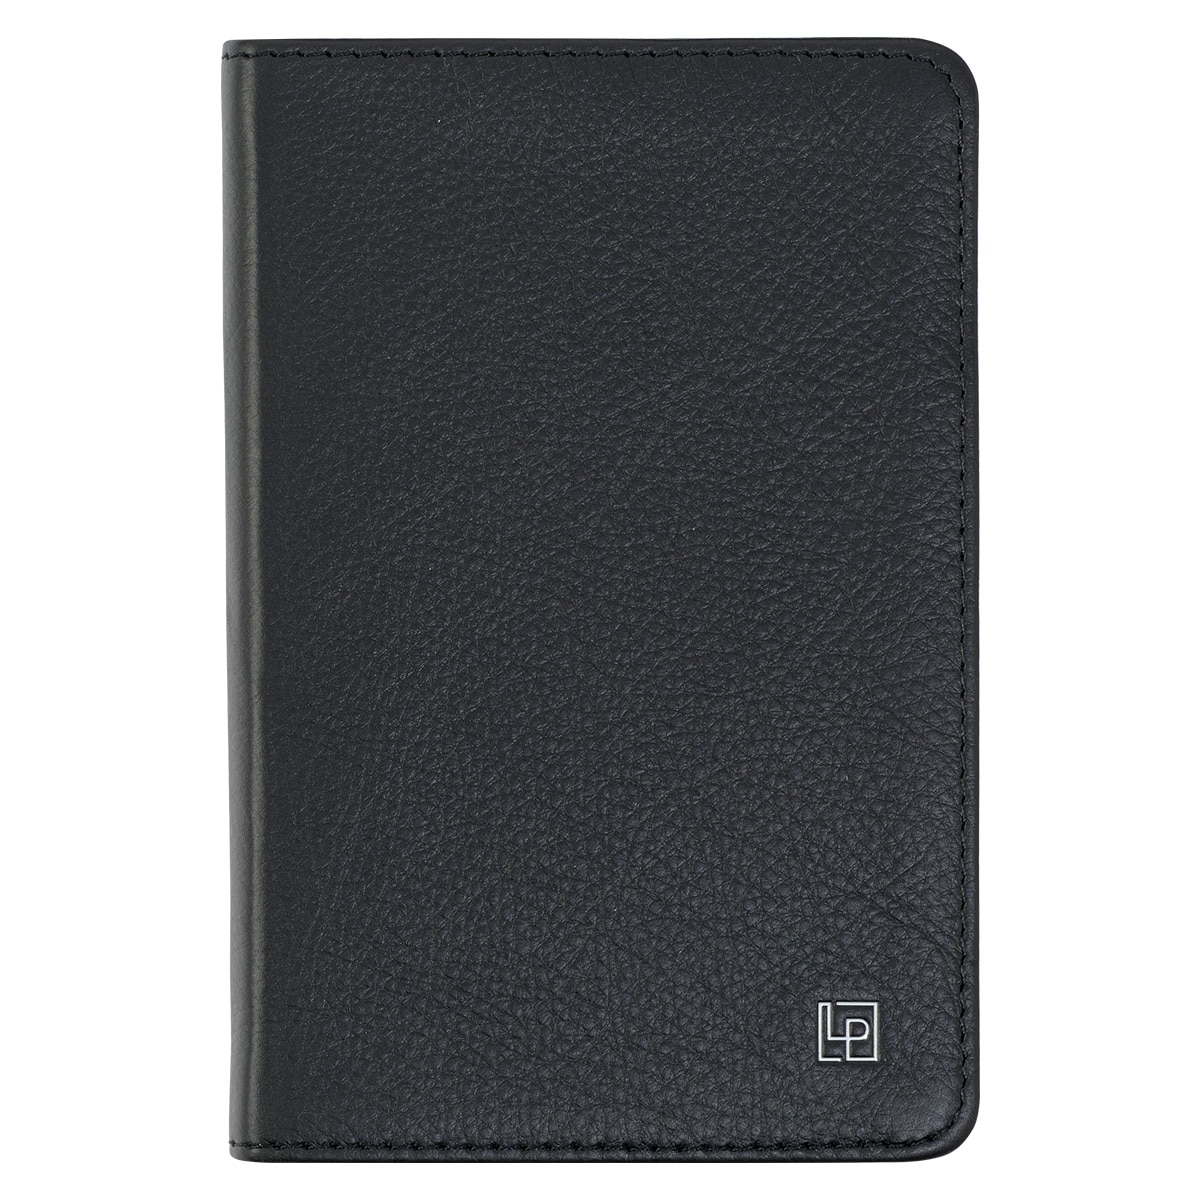 Front Cover of the pocket Tuxedo Black Journal with silver debossed Leatherpress icon logo in the bottom right corner.